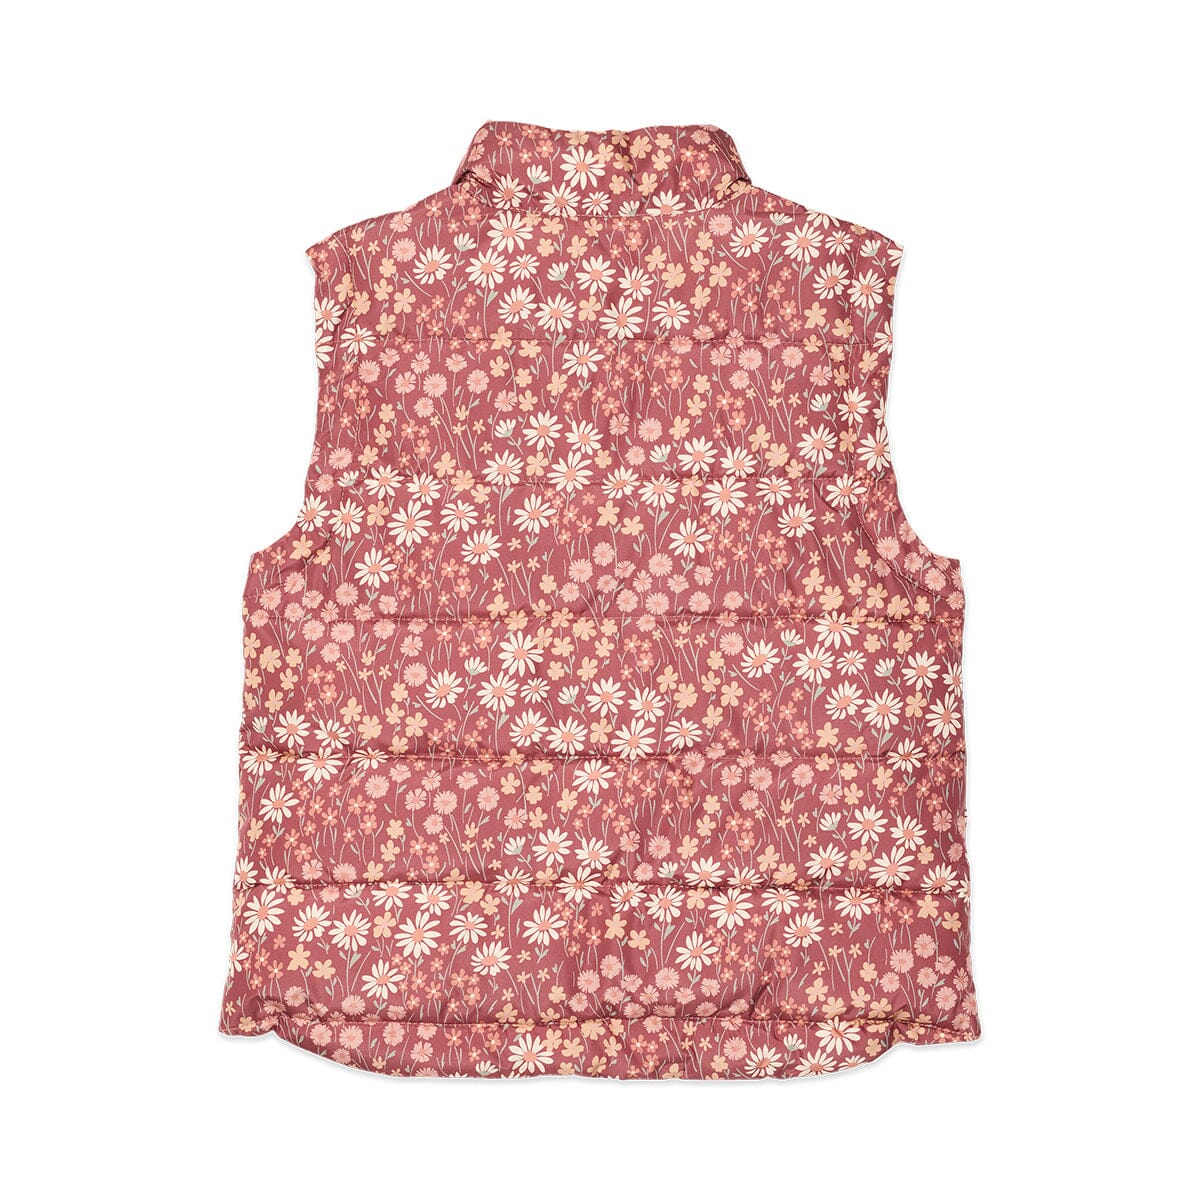 Crywolf | REVERSIBLE VEST - Rosewood Floral *** PRE ORDER / DUE EARLY-MID APRIL *** Girls Crywolf